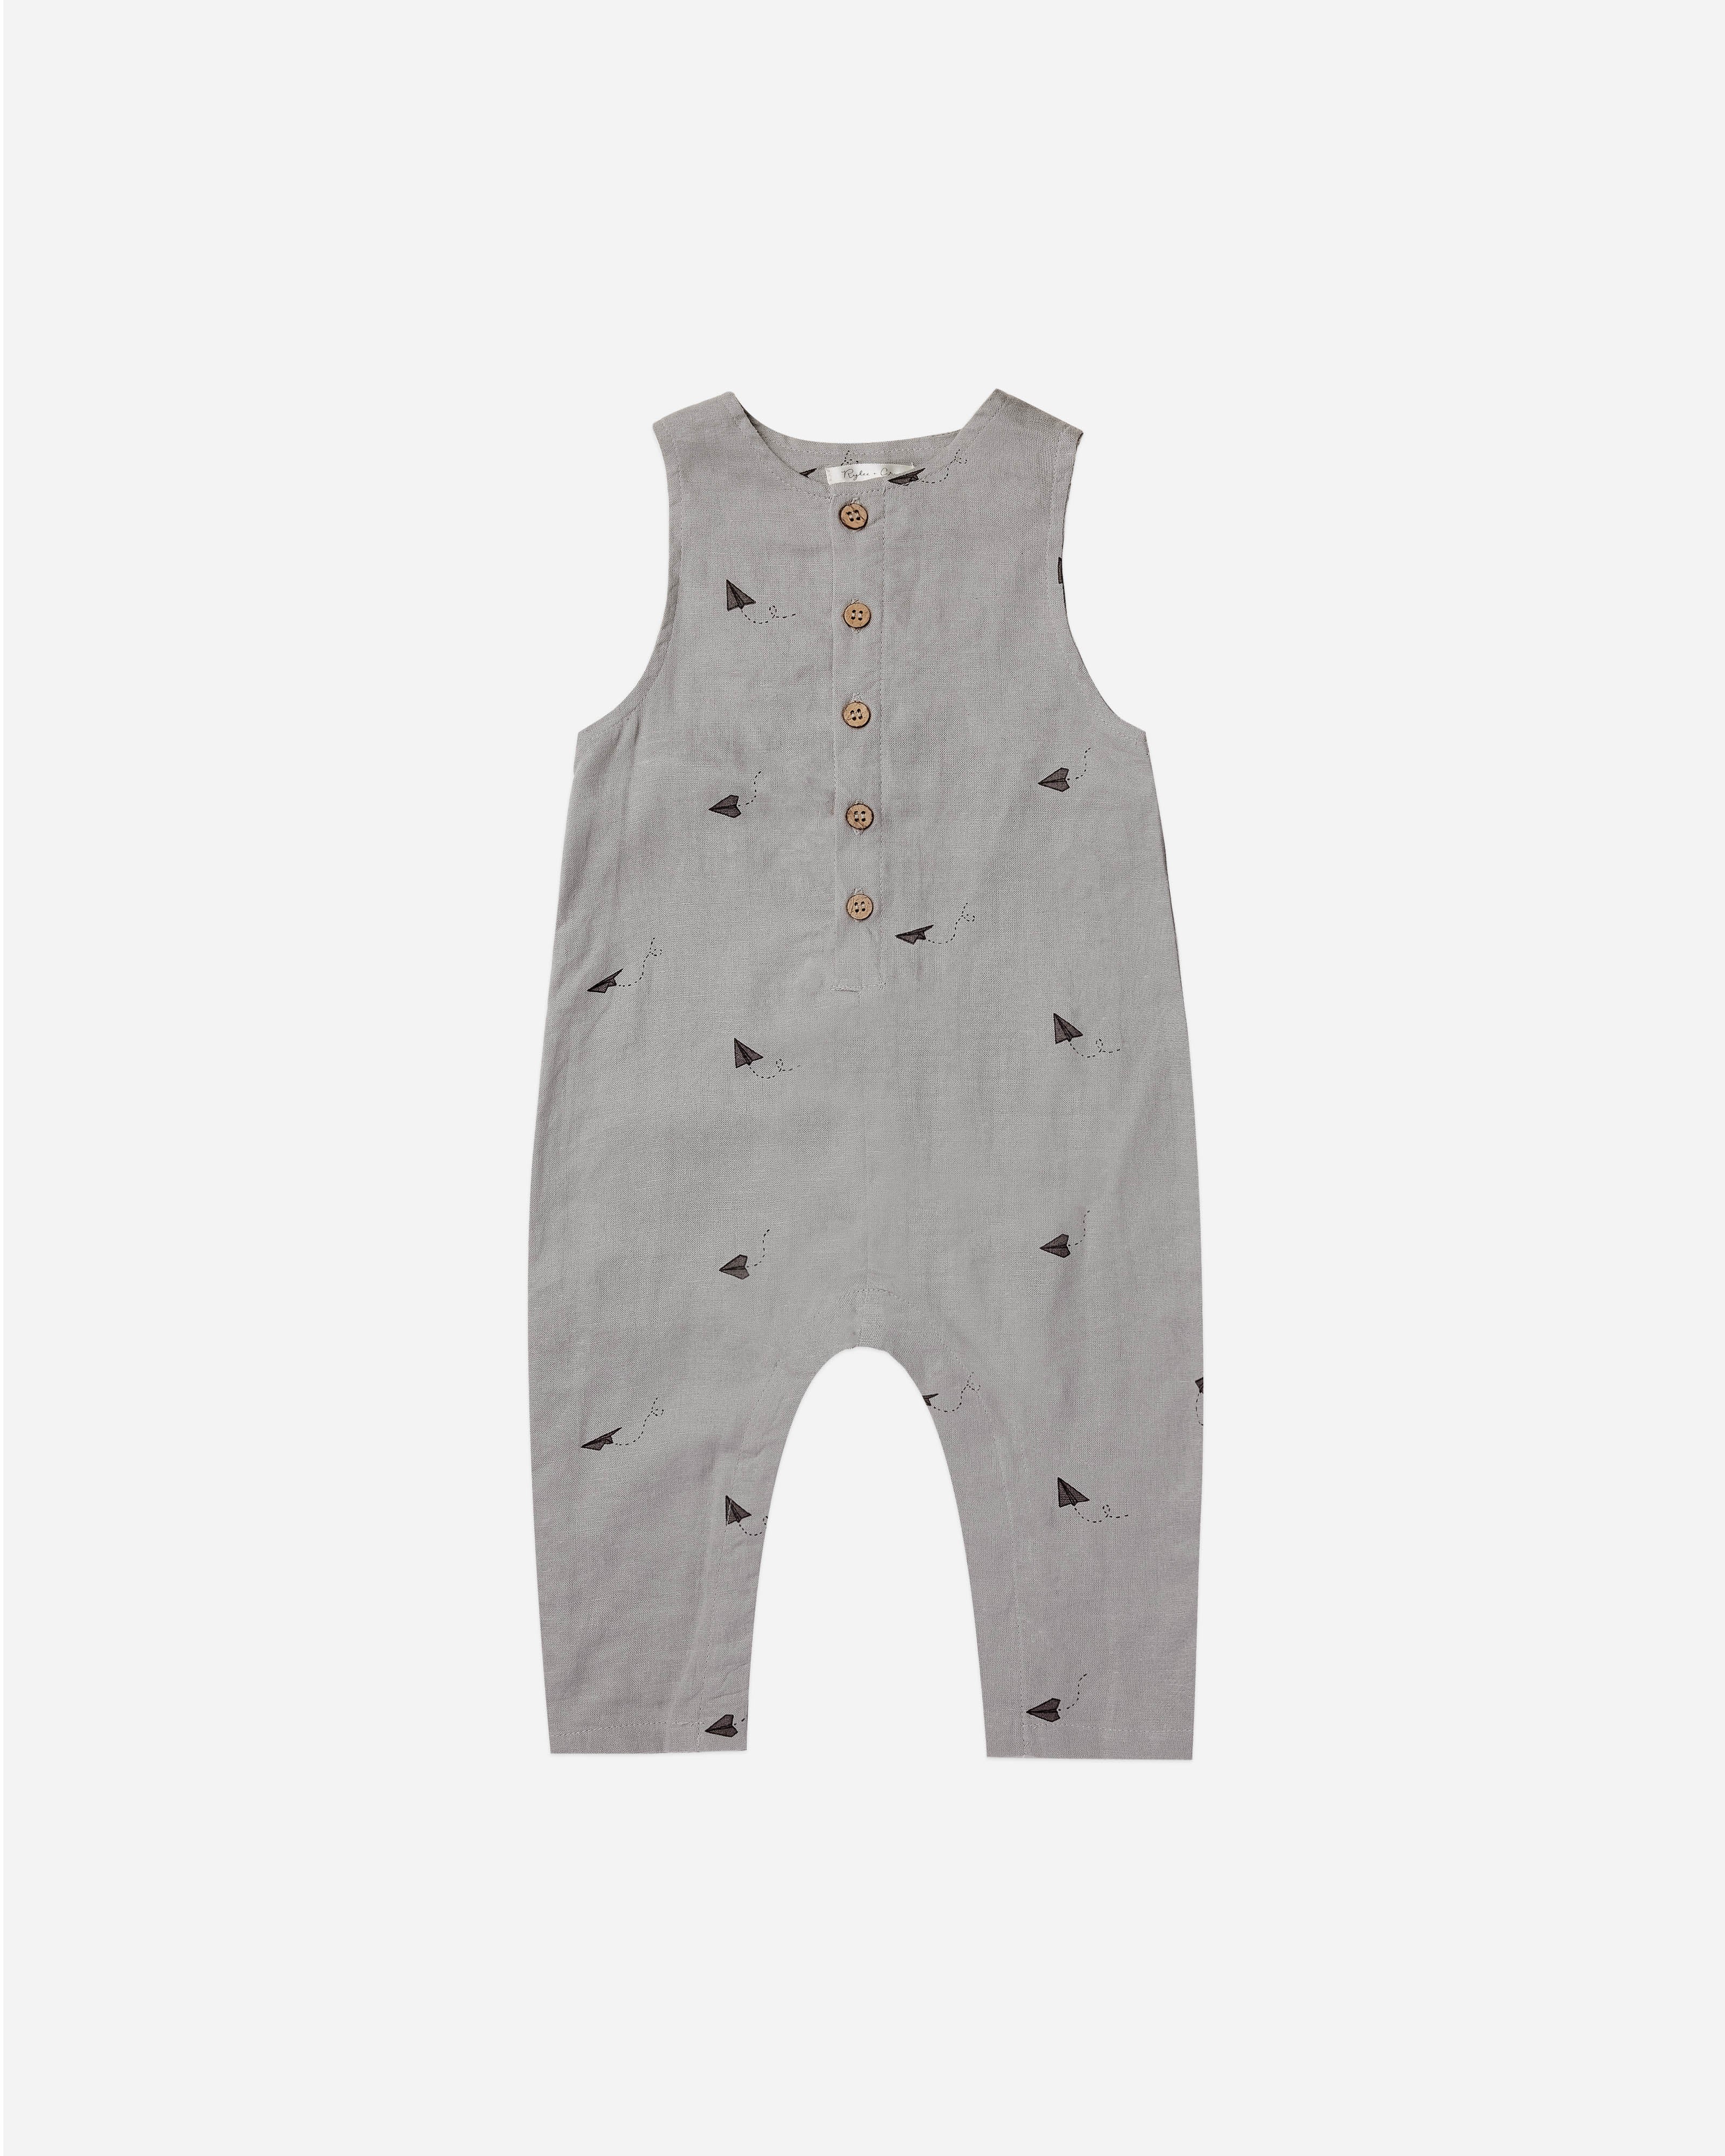 button jumpsuit || paper planes - Rylee + Cru | Kids Clothes | Trendy Baby Clothes | Modern Infant Outfits |